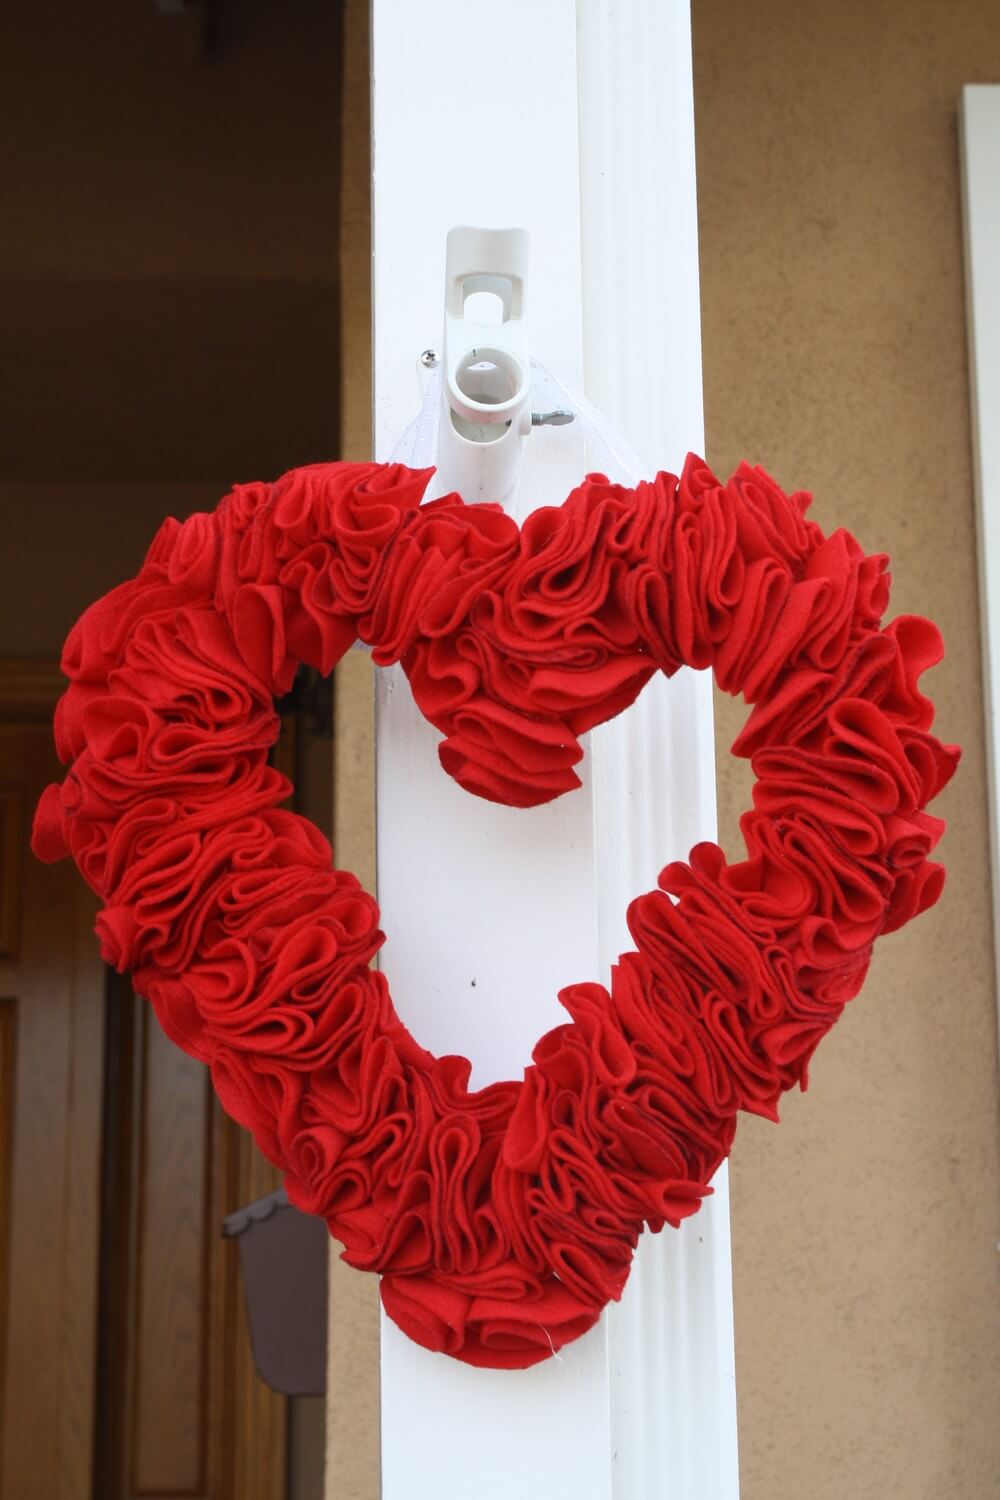 A heart shaped wreath hanging on a door
